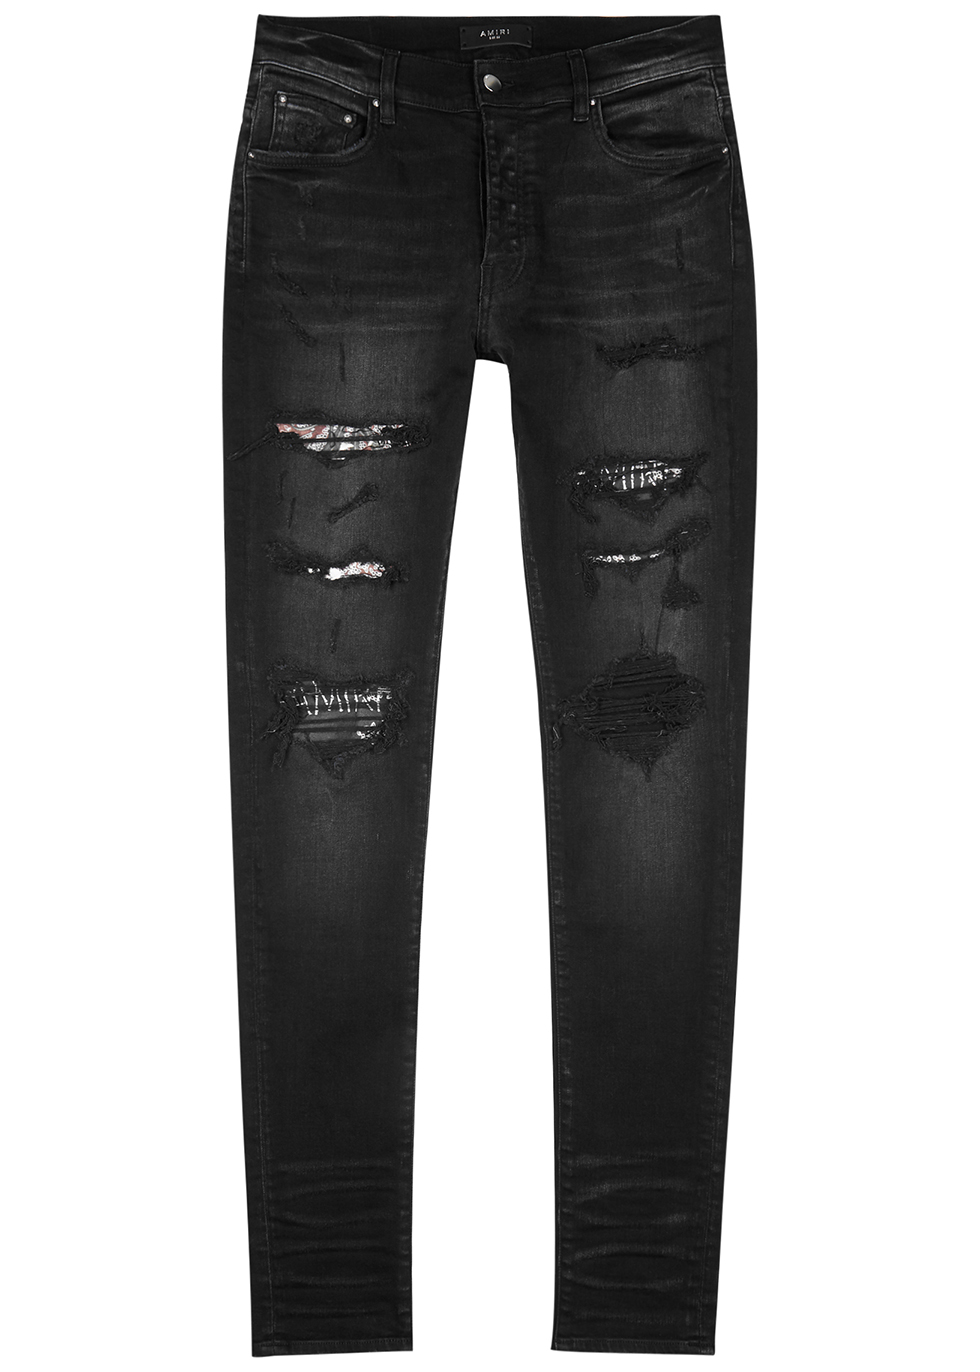 Hibiscus Artpatch black distressed skinny jeans